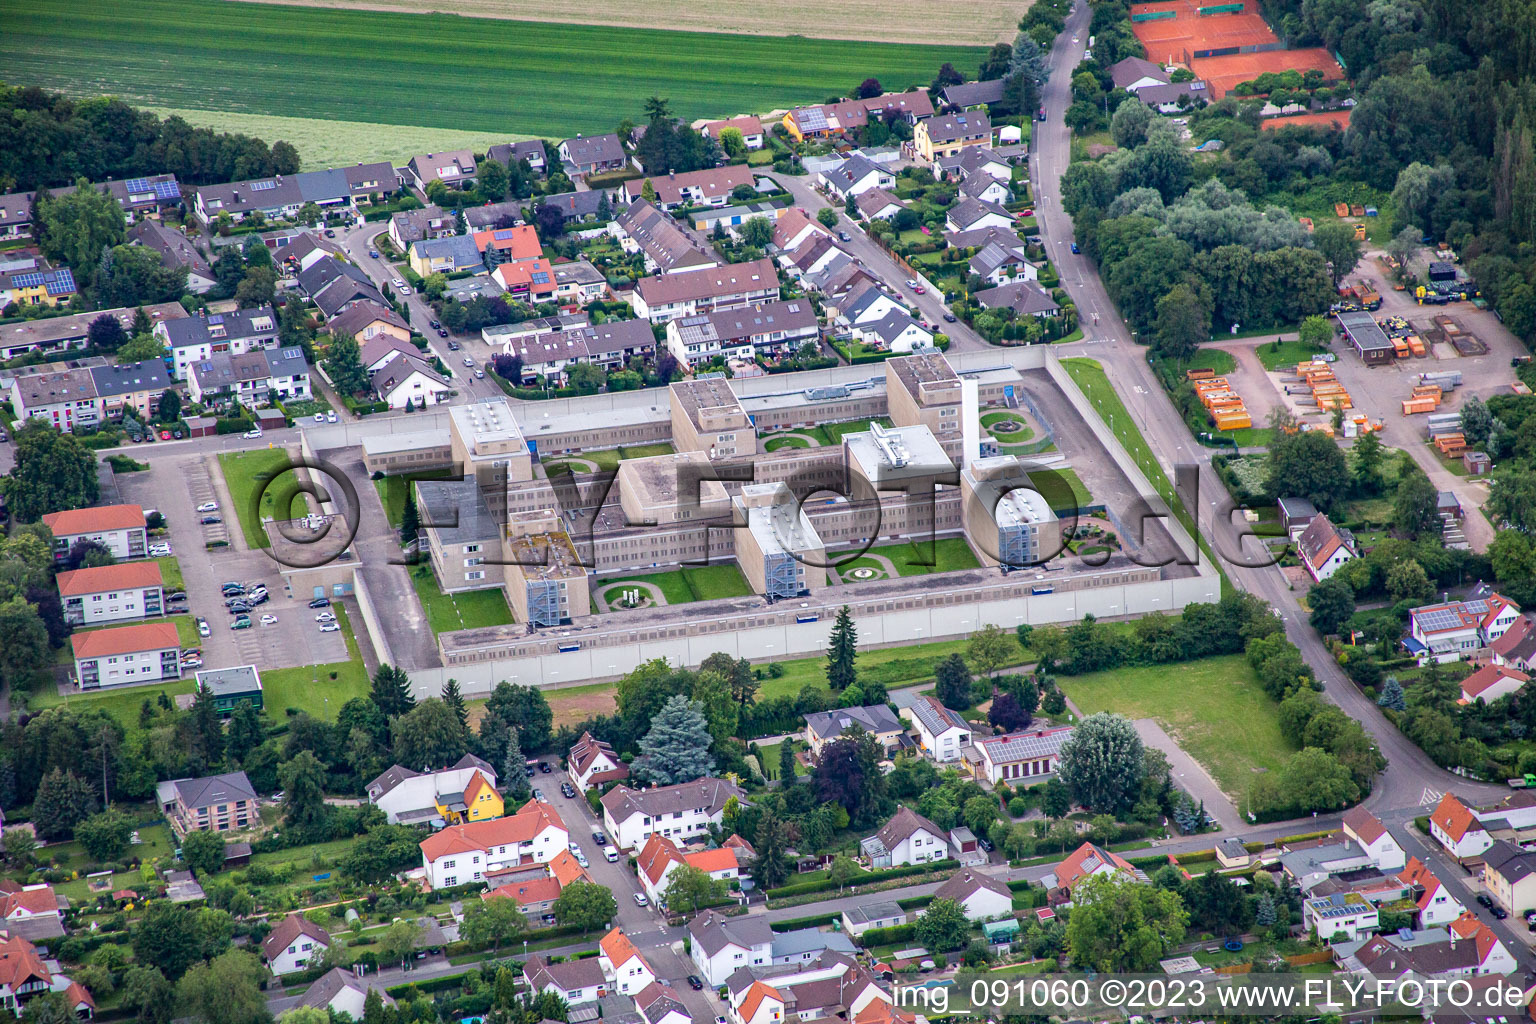 Aerial view of Correctional facility in Frankenthal in the state Rhineland-Palatinate, Germany